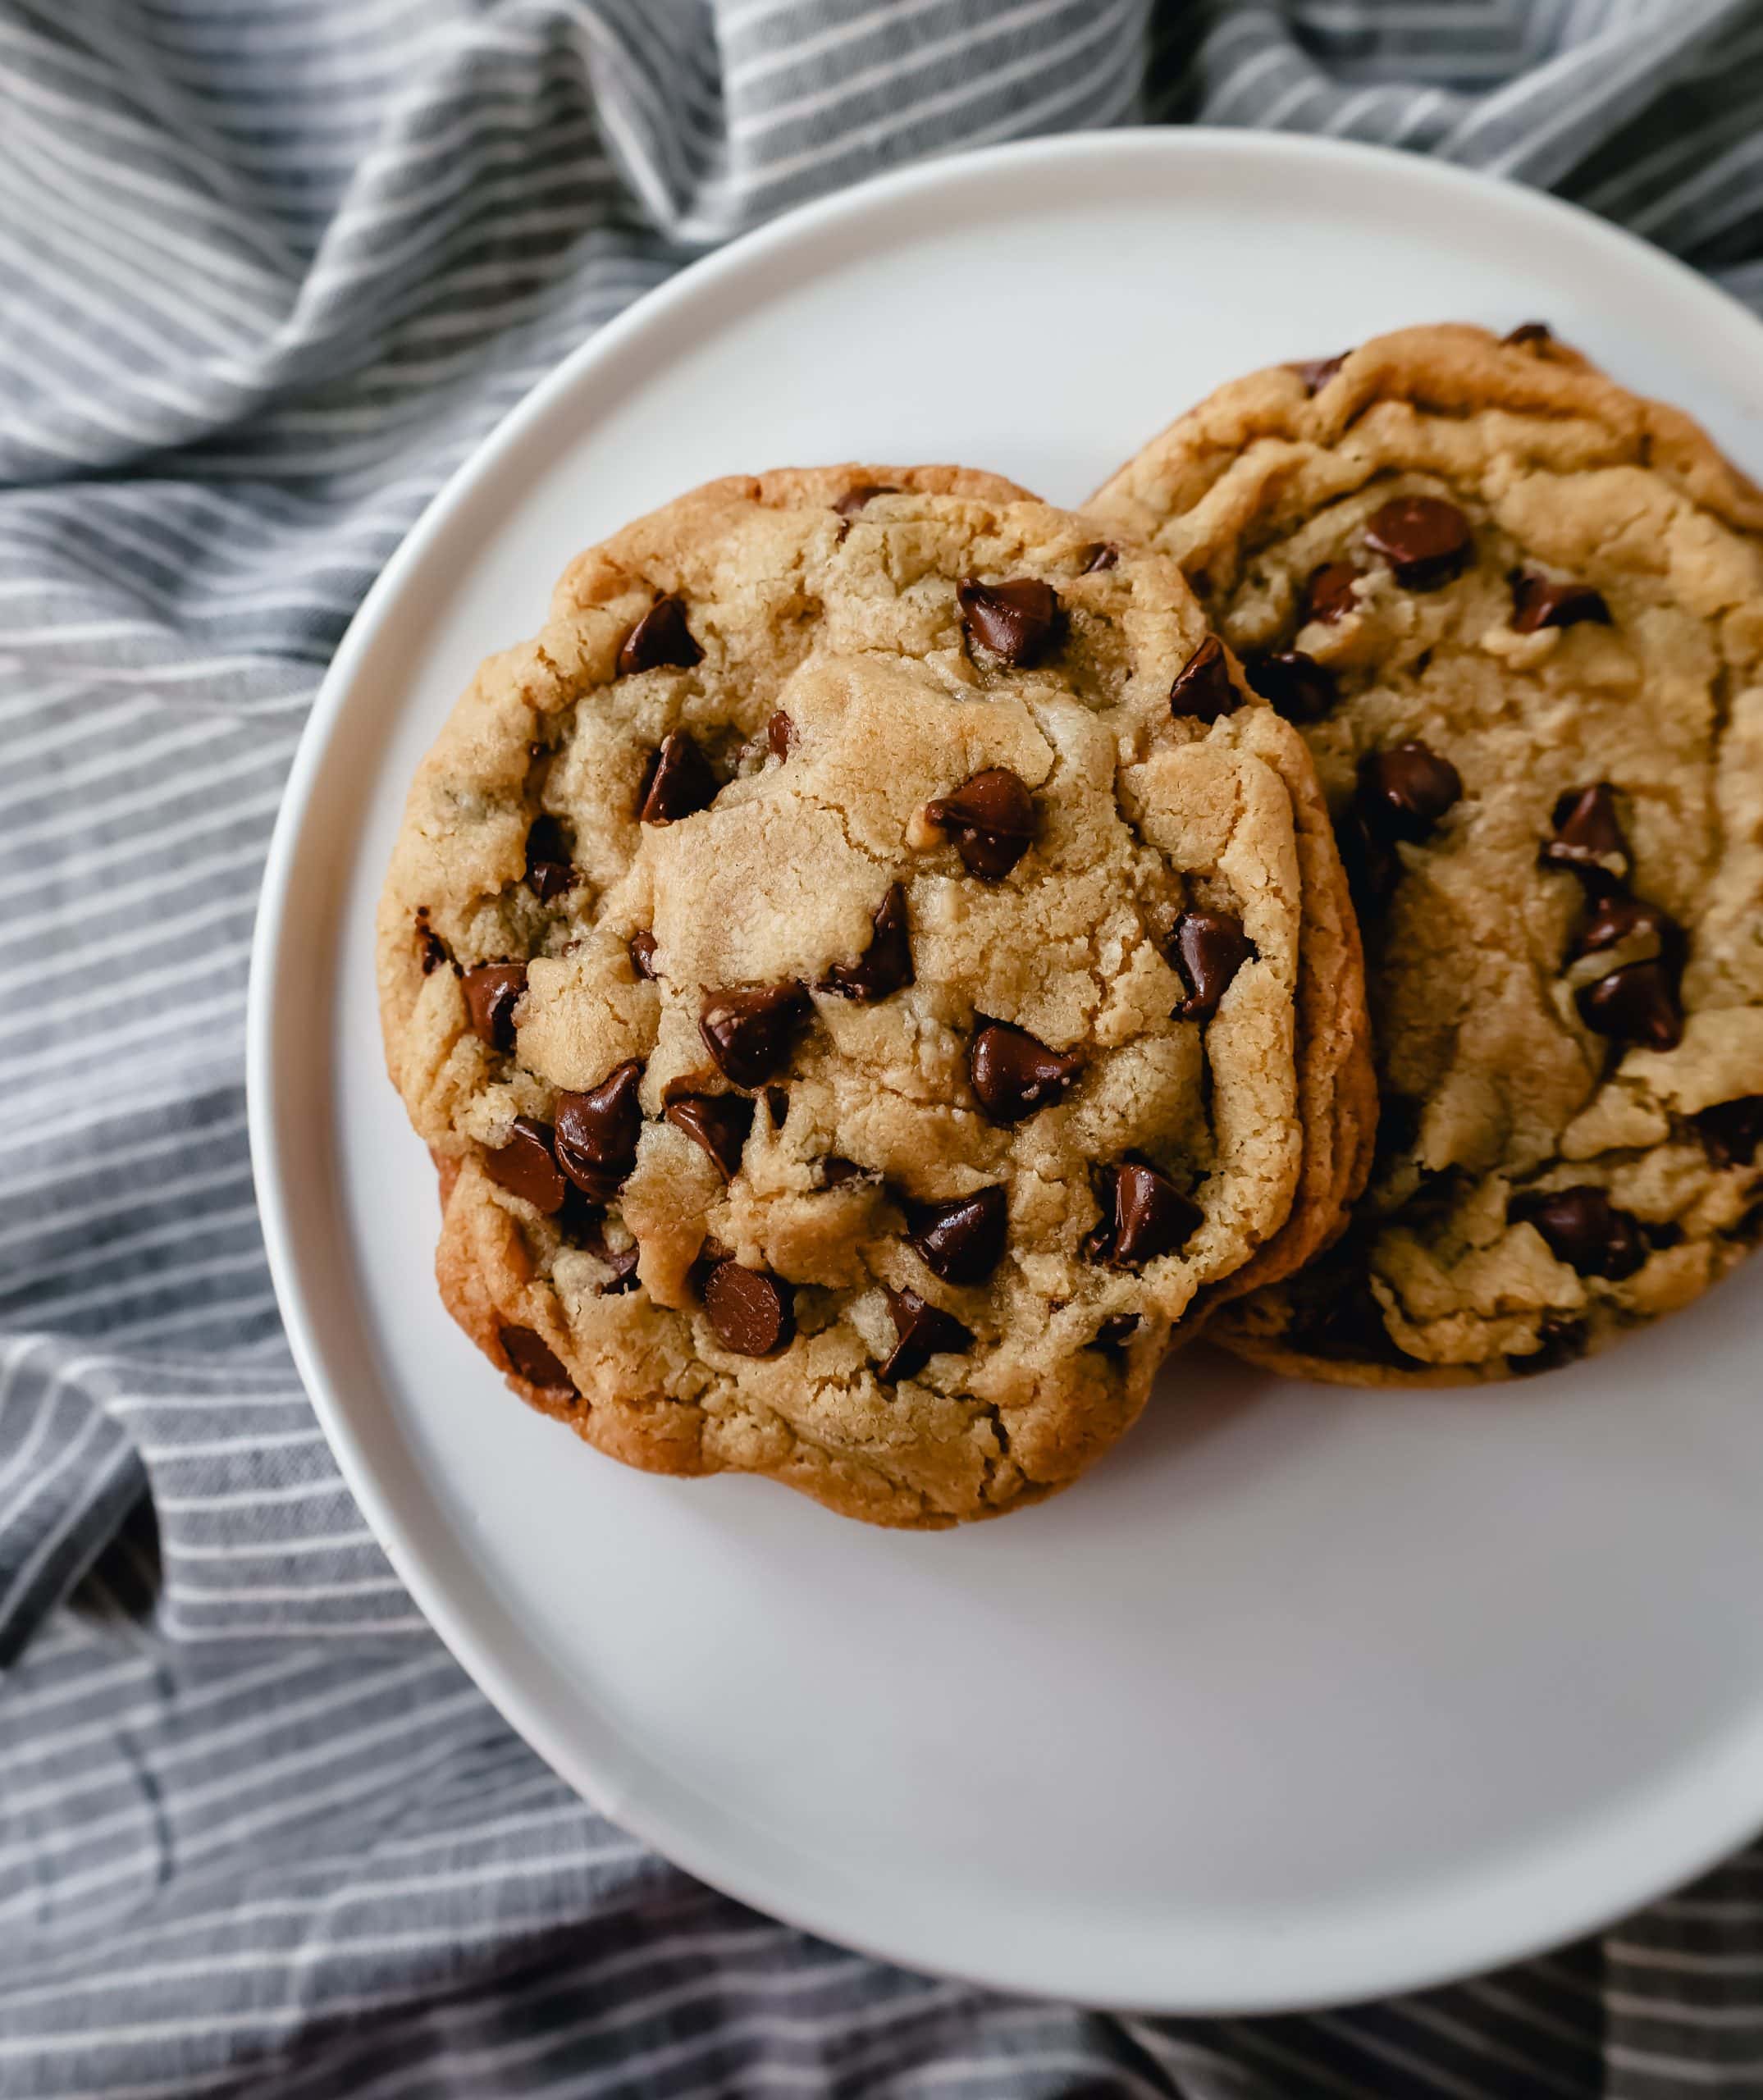 https://www.modernhoney.com/wp-content/uploads/2021/12/Chocolate-Chip-Cookies-for-Two-15-scaled.jpg